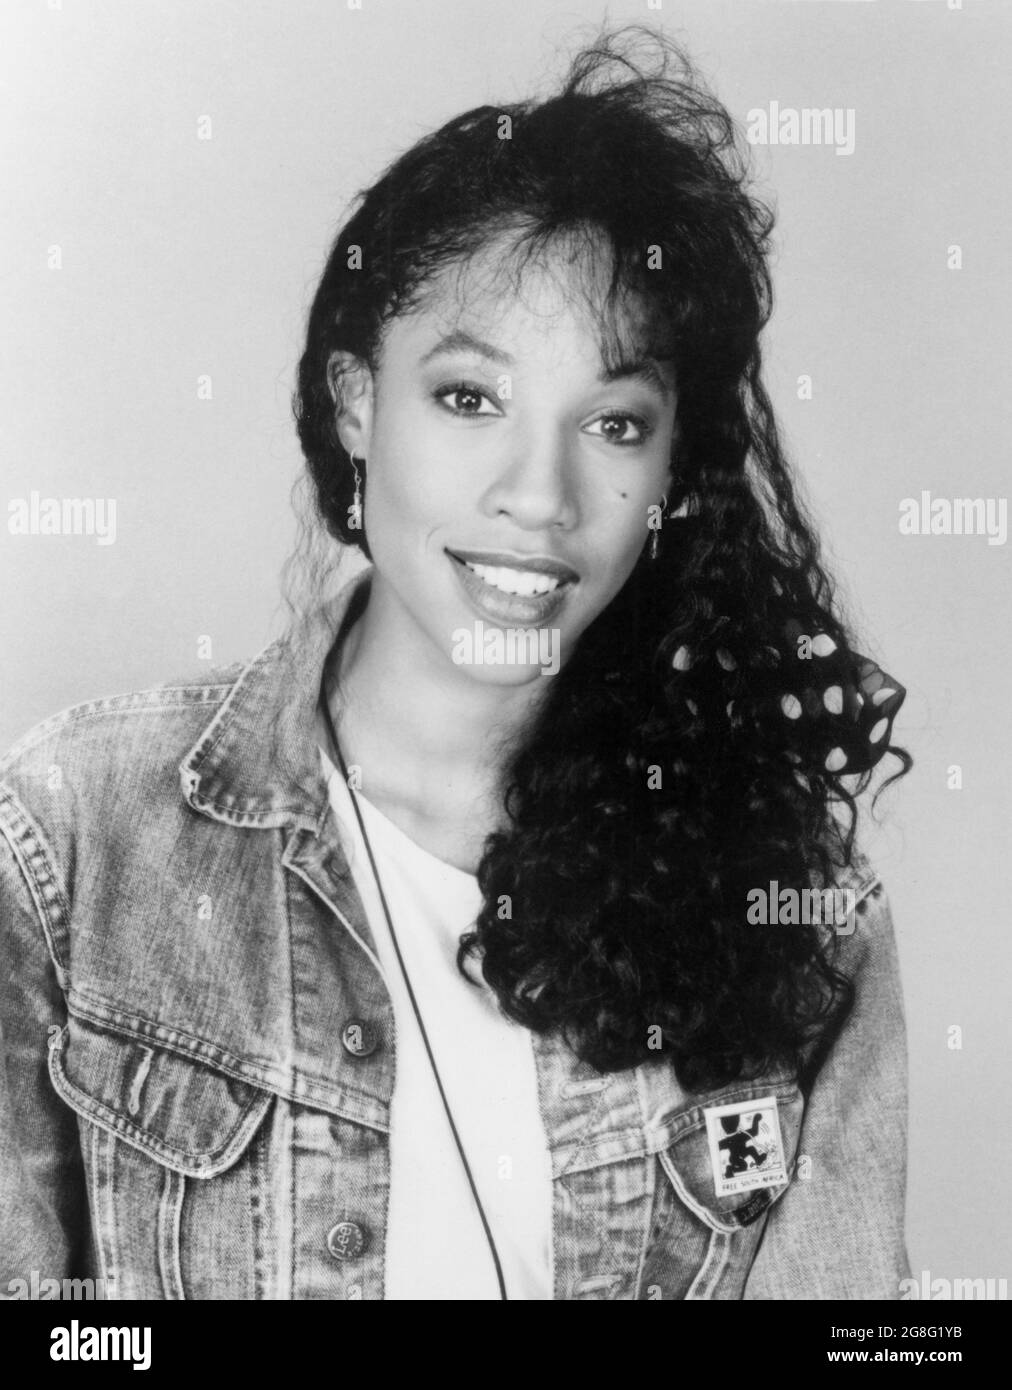 Kimberly Russell, Head and Shoulders Publicity Portrait for the Film, 'Ghost Dad', photo by Howard Bingham, Universal Pictures, 1990 Stock Photo